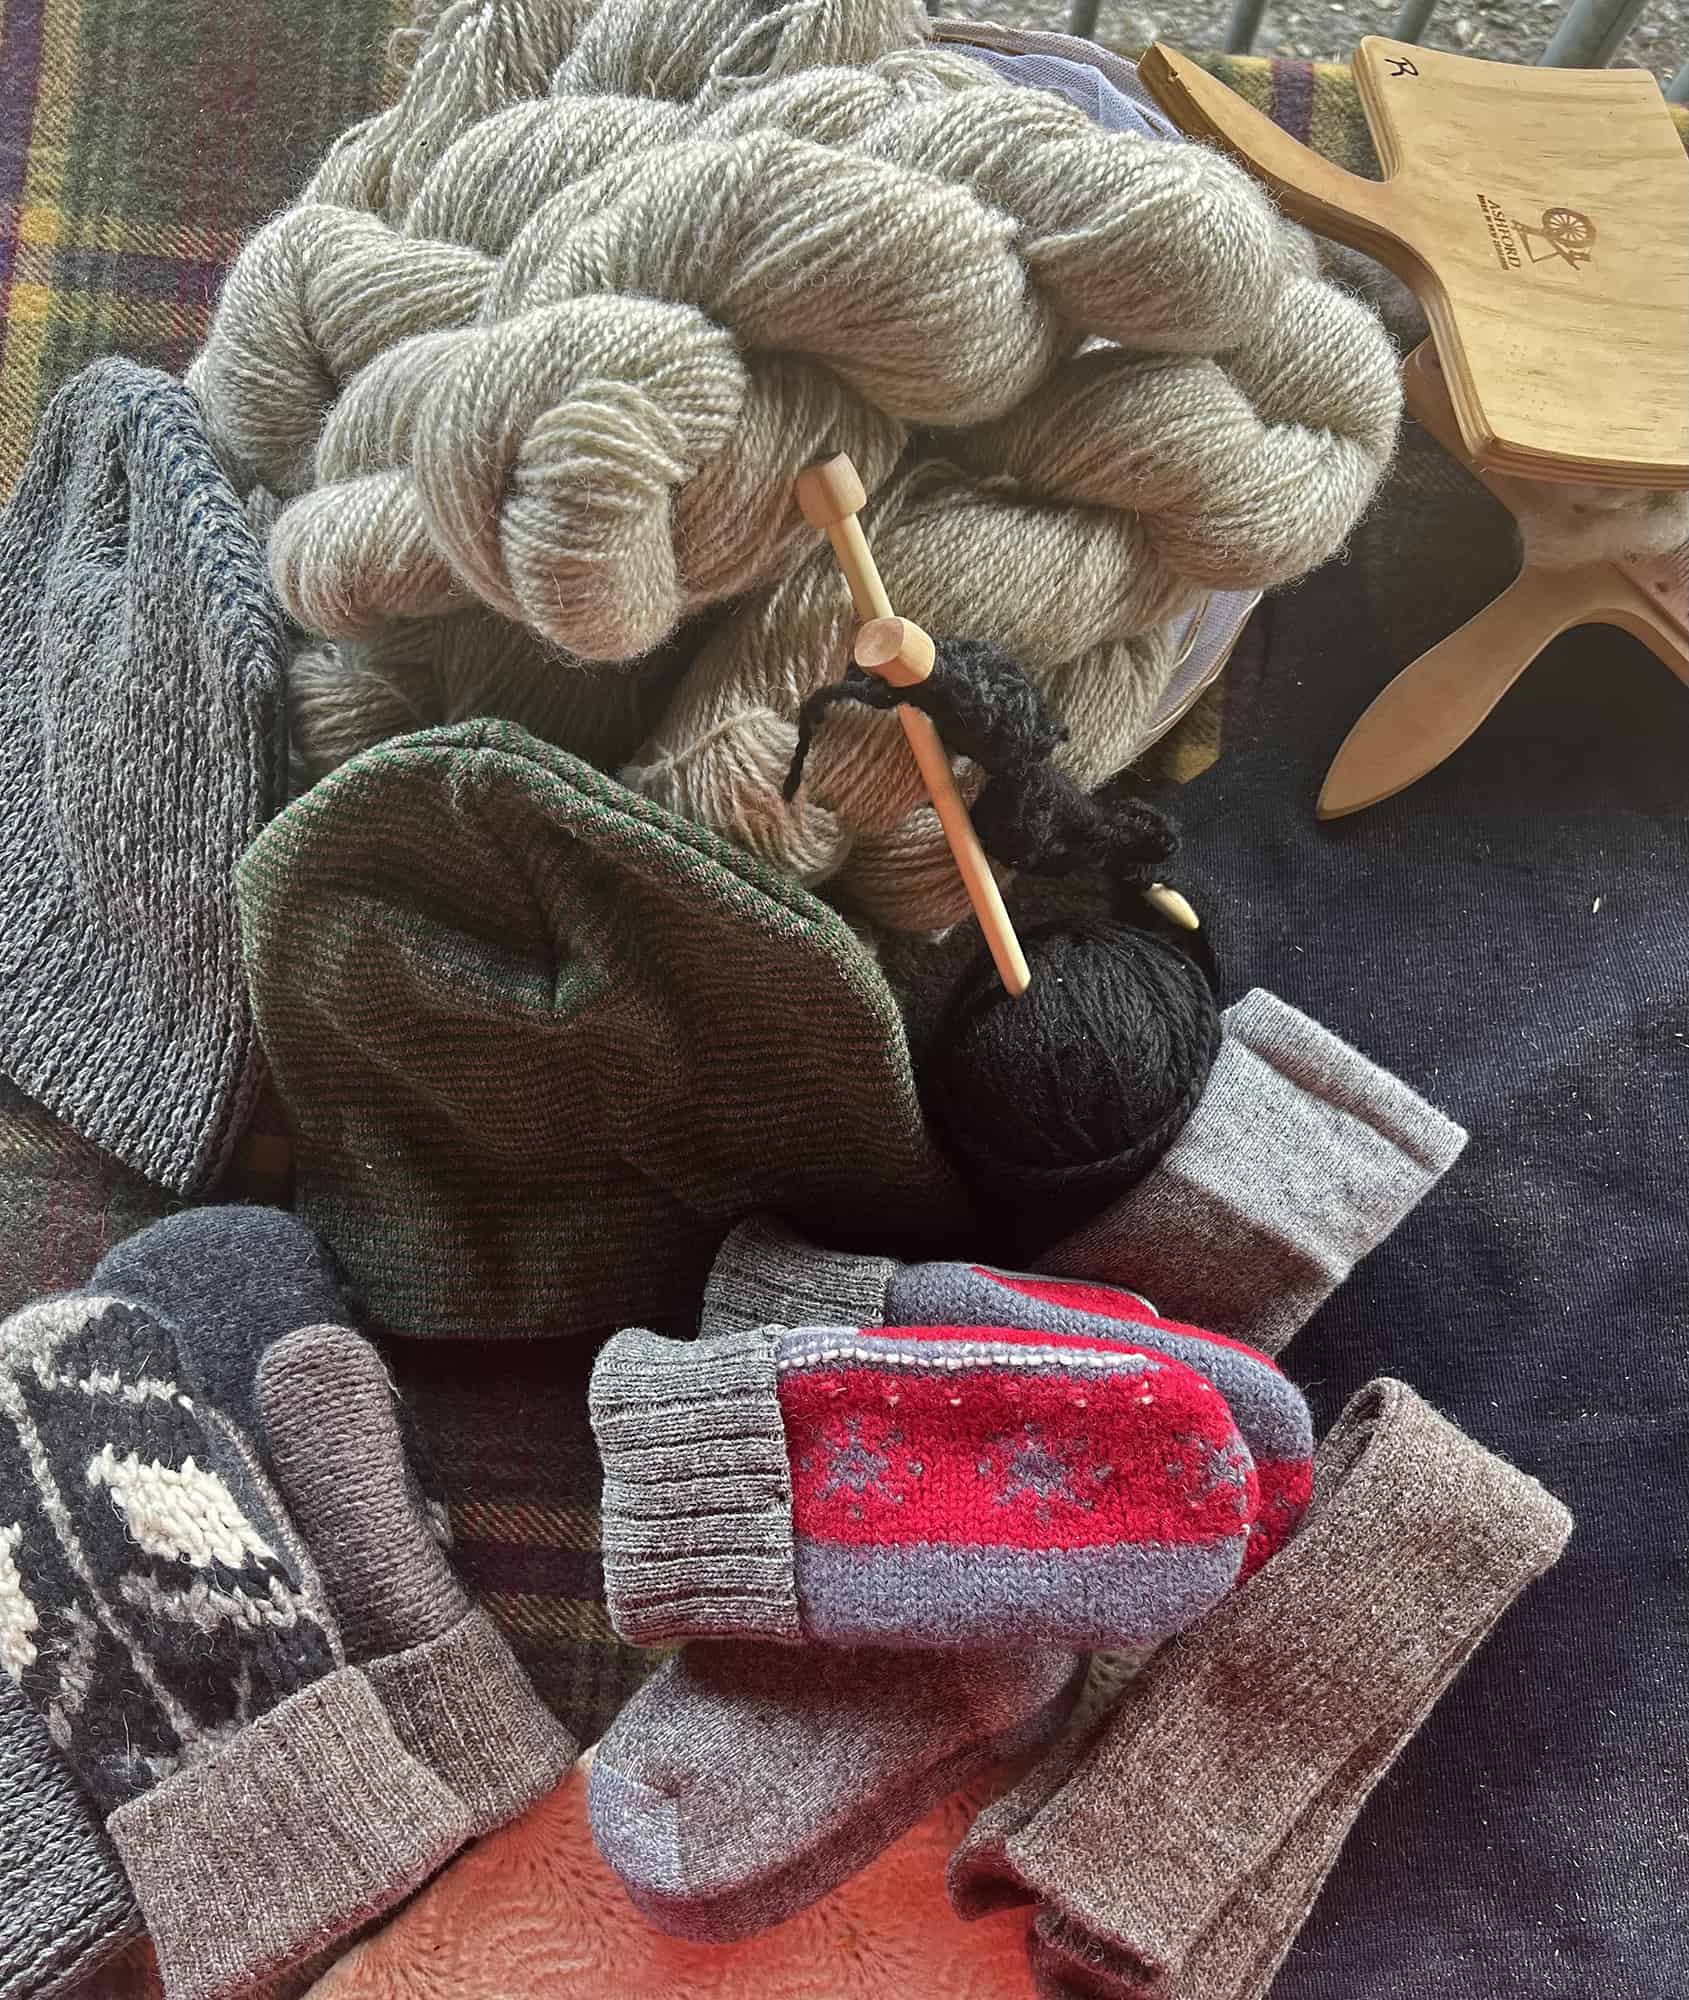 Products Made From Our Wool